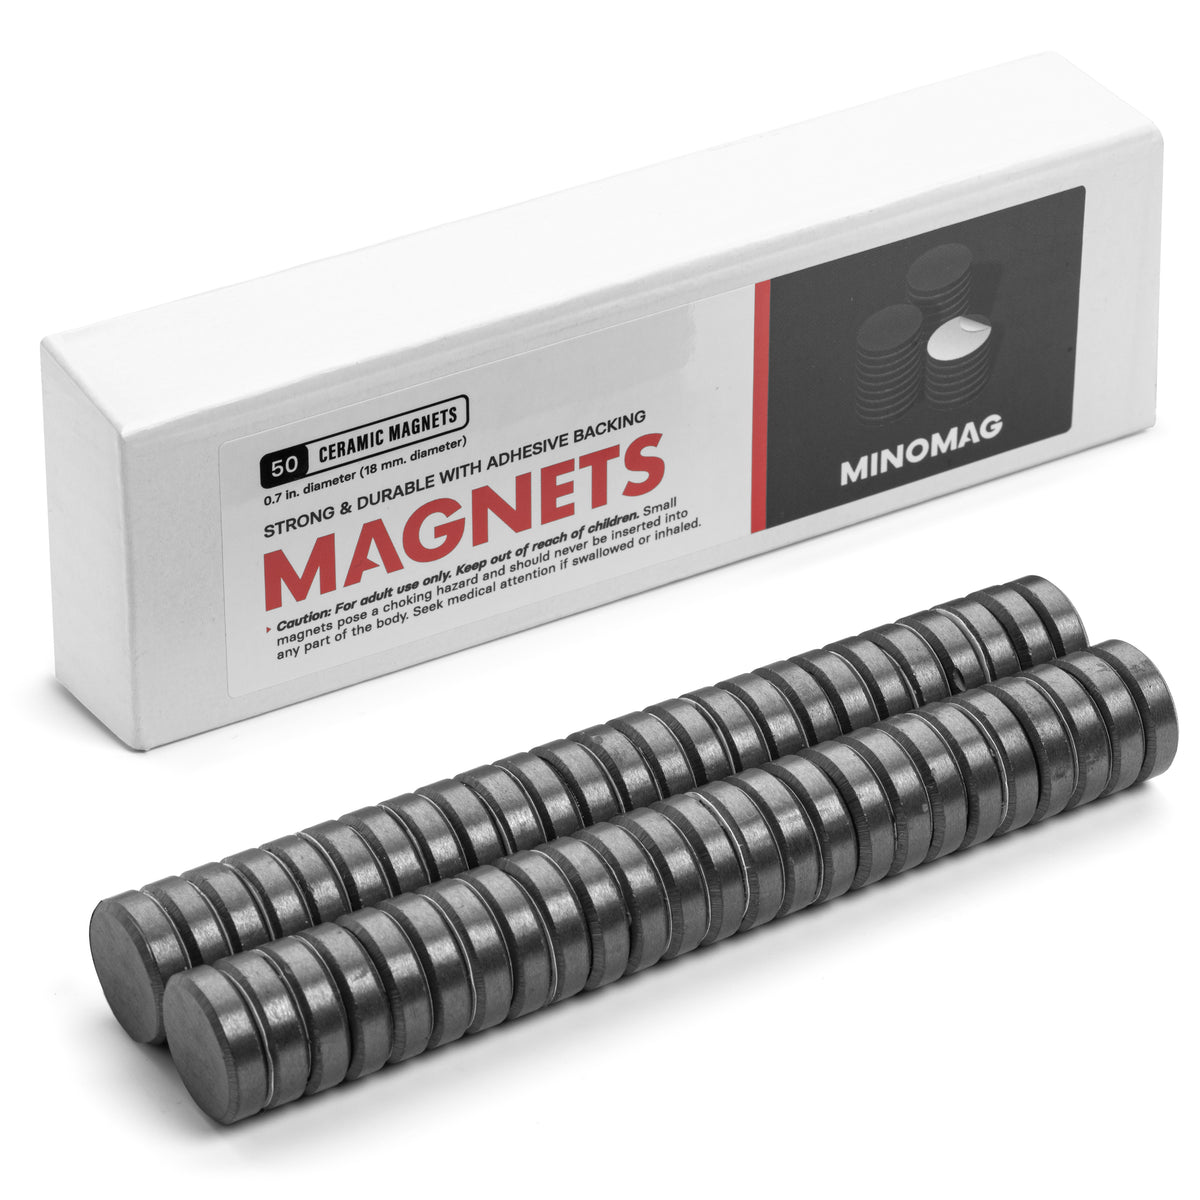 MINOMAG: Magnets for Home and Office Use – Minomag